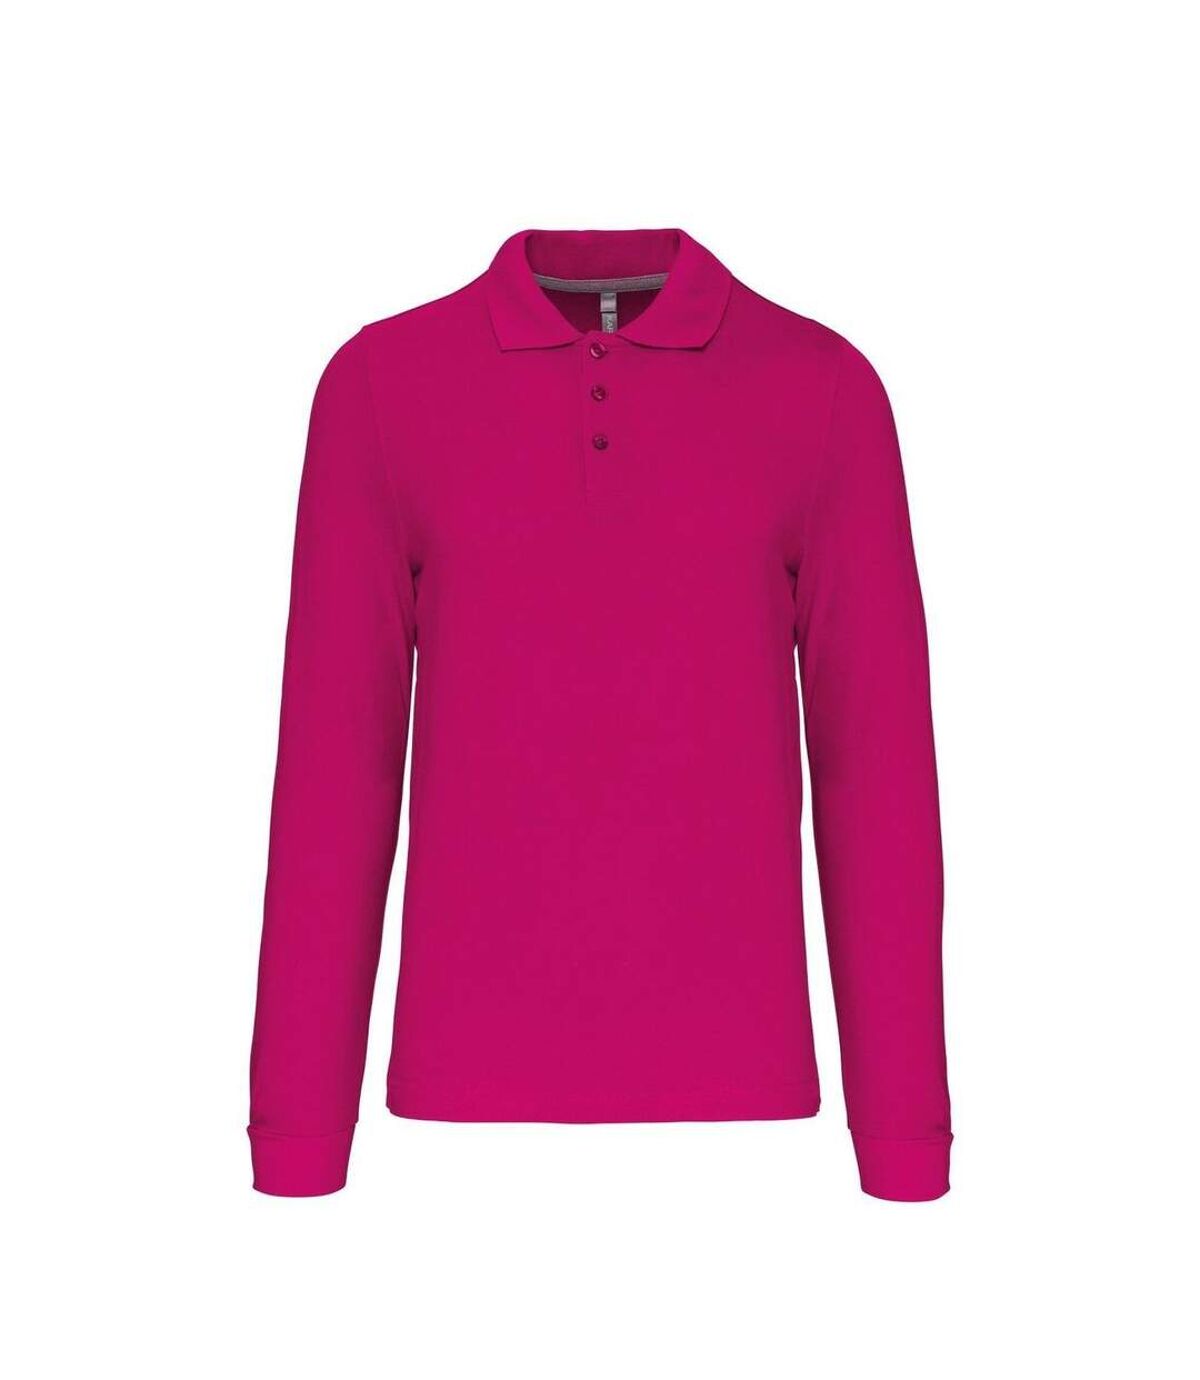 Polo manches longues - Homme - K243 - rose fuchsia